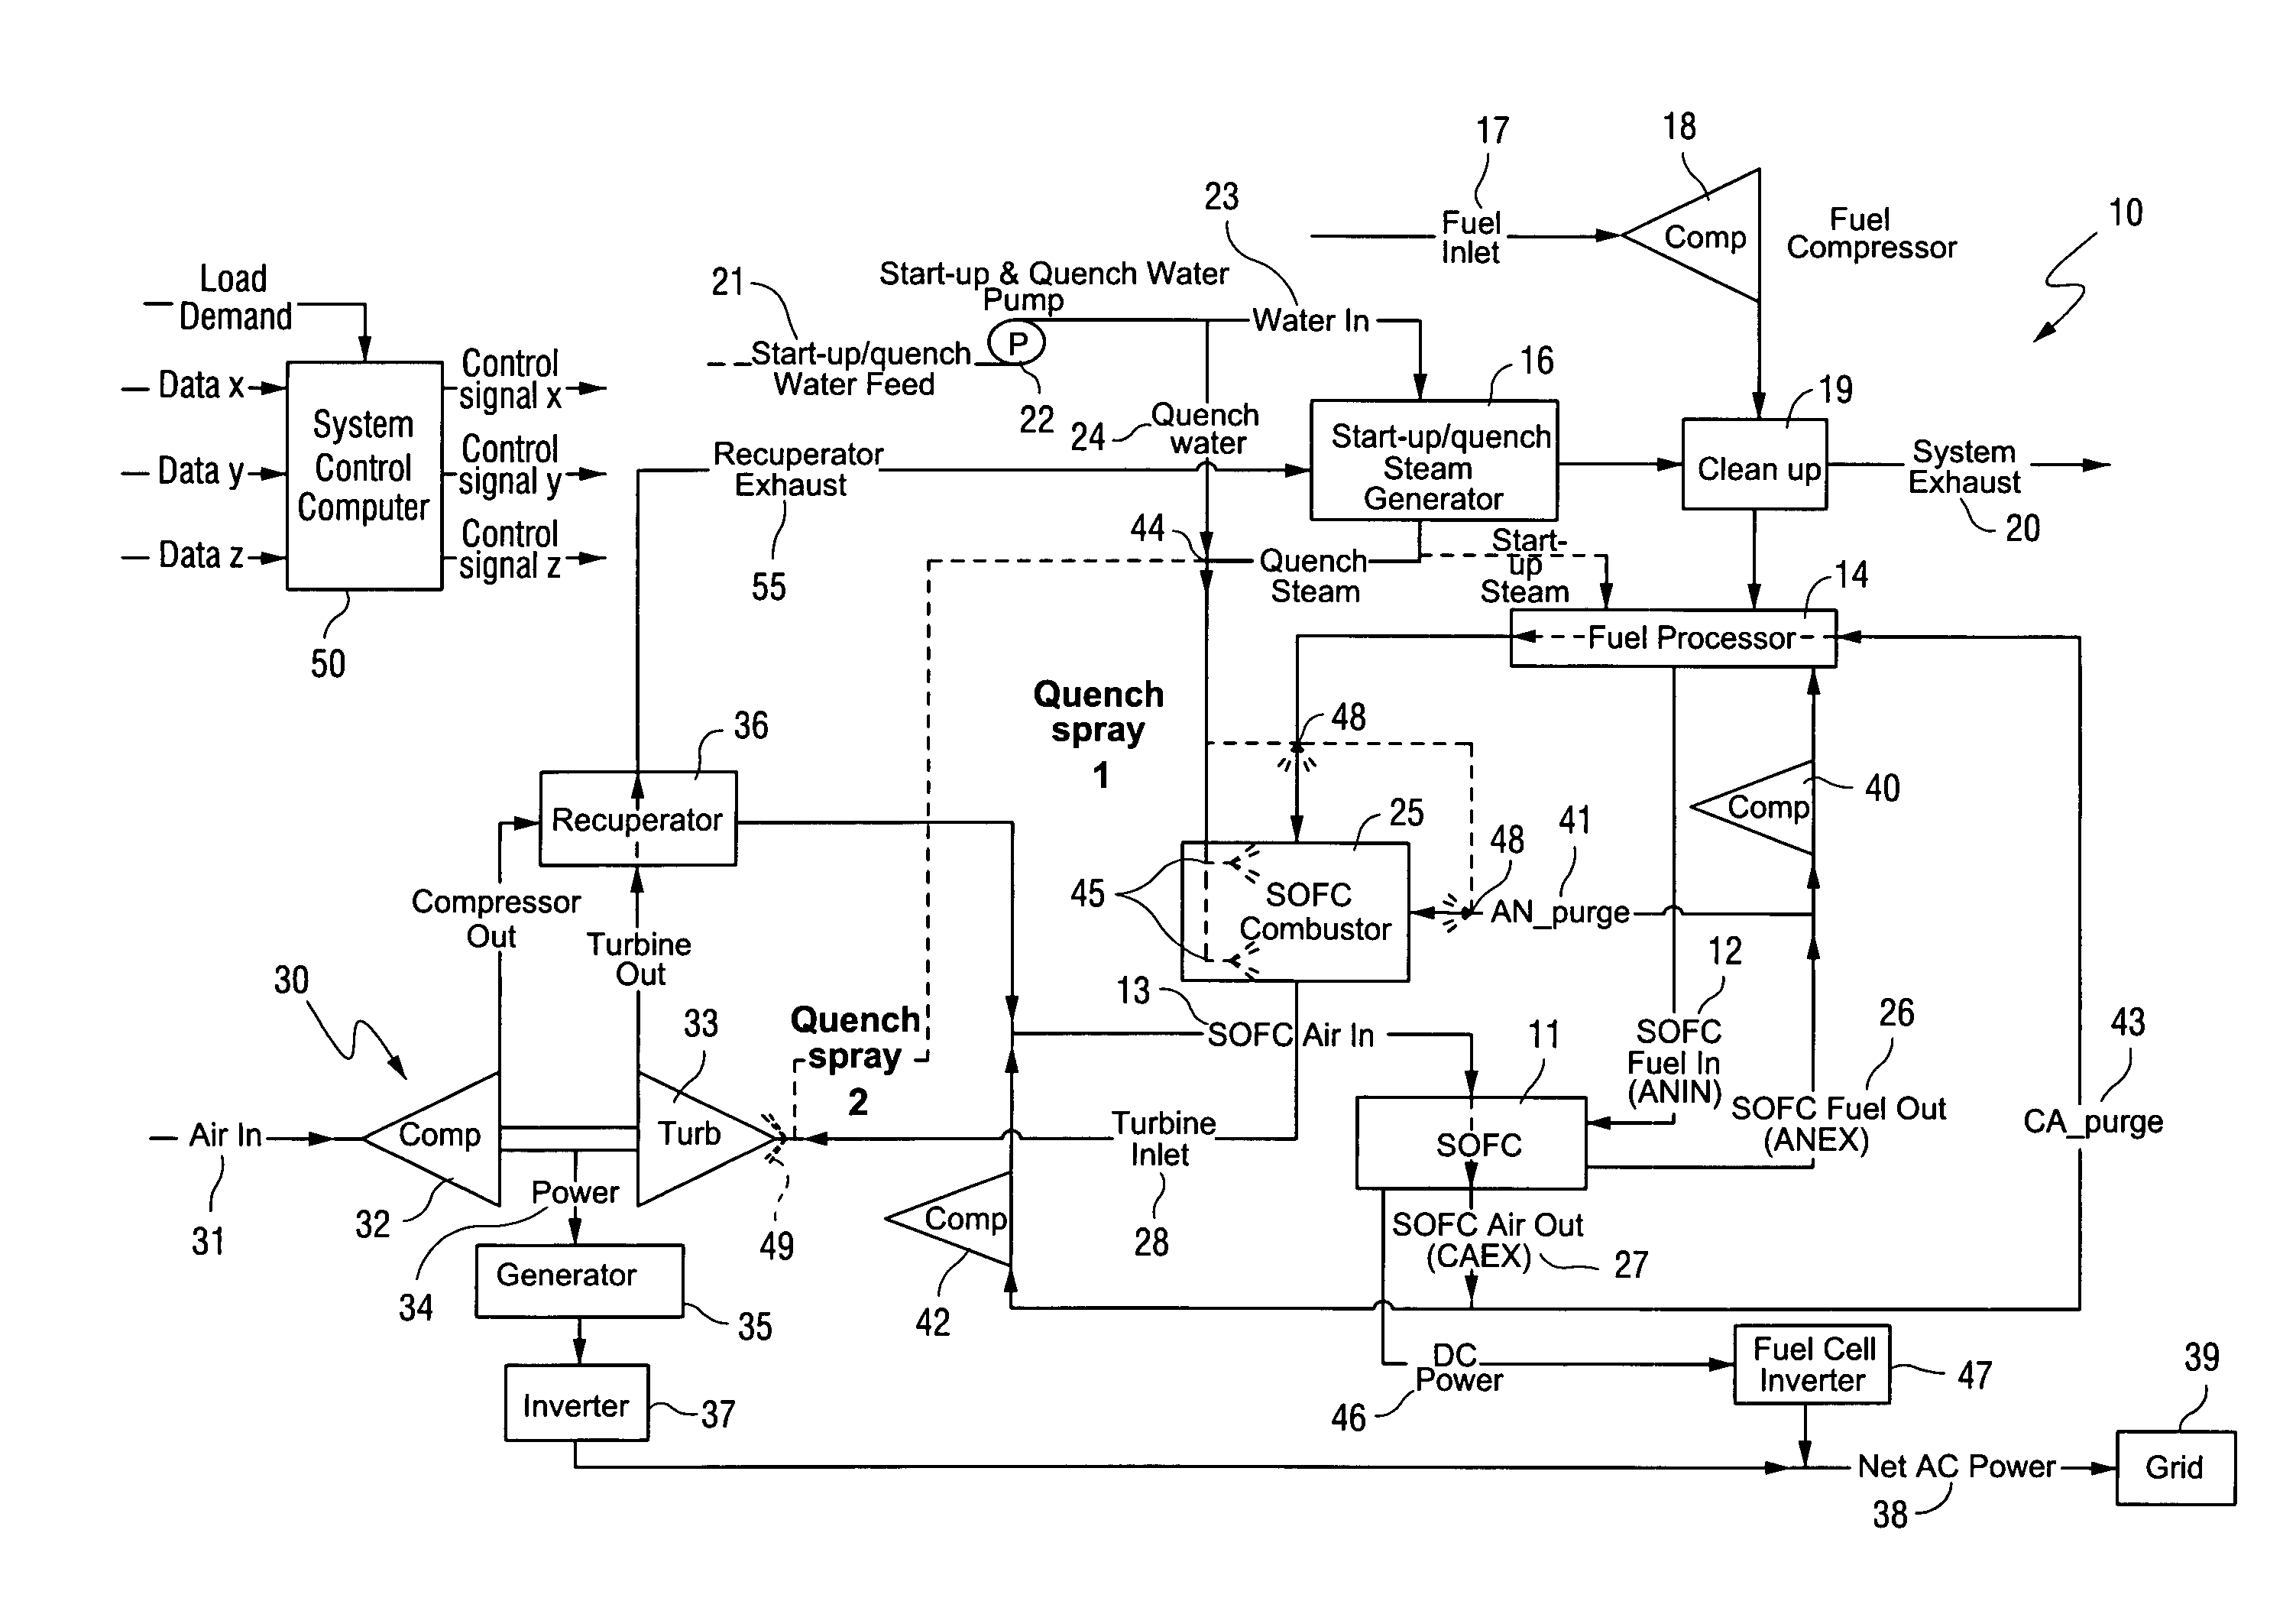 High temperature protection of hybrid fuel cell system combustor and other components VIA water or water vapor injection